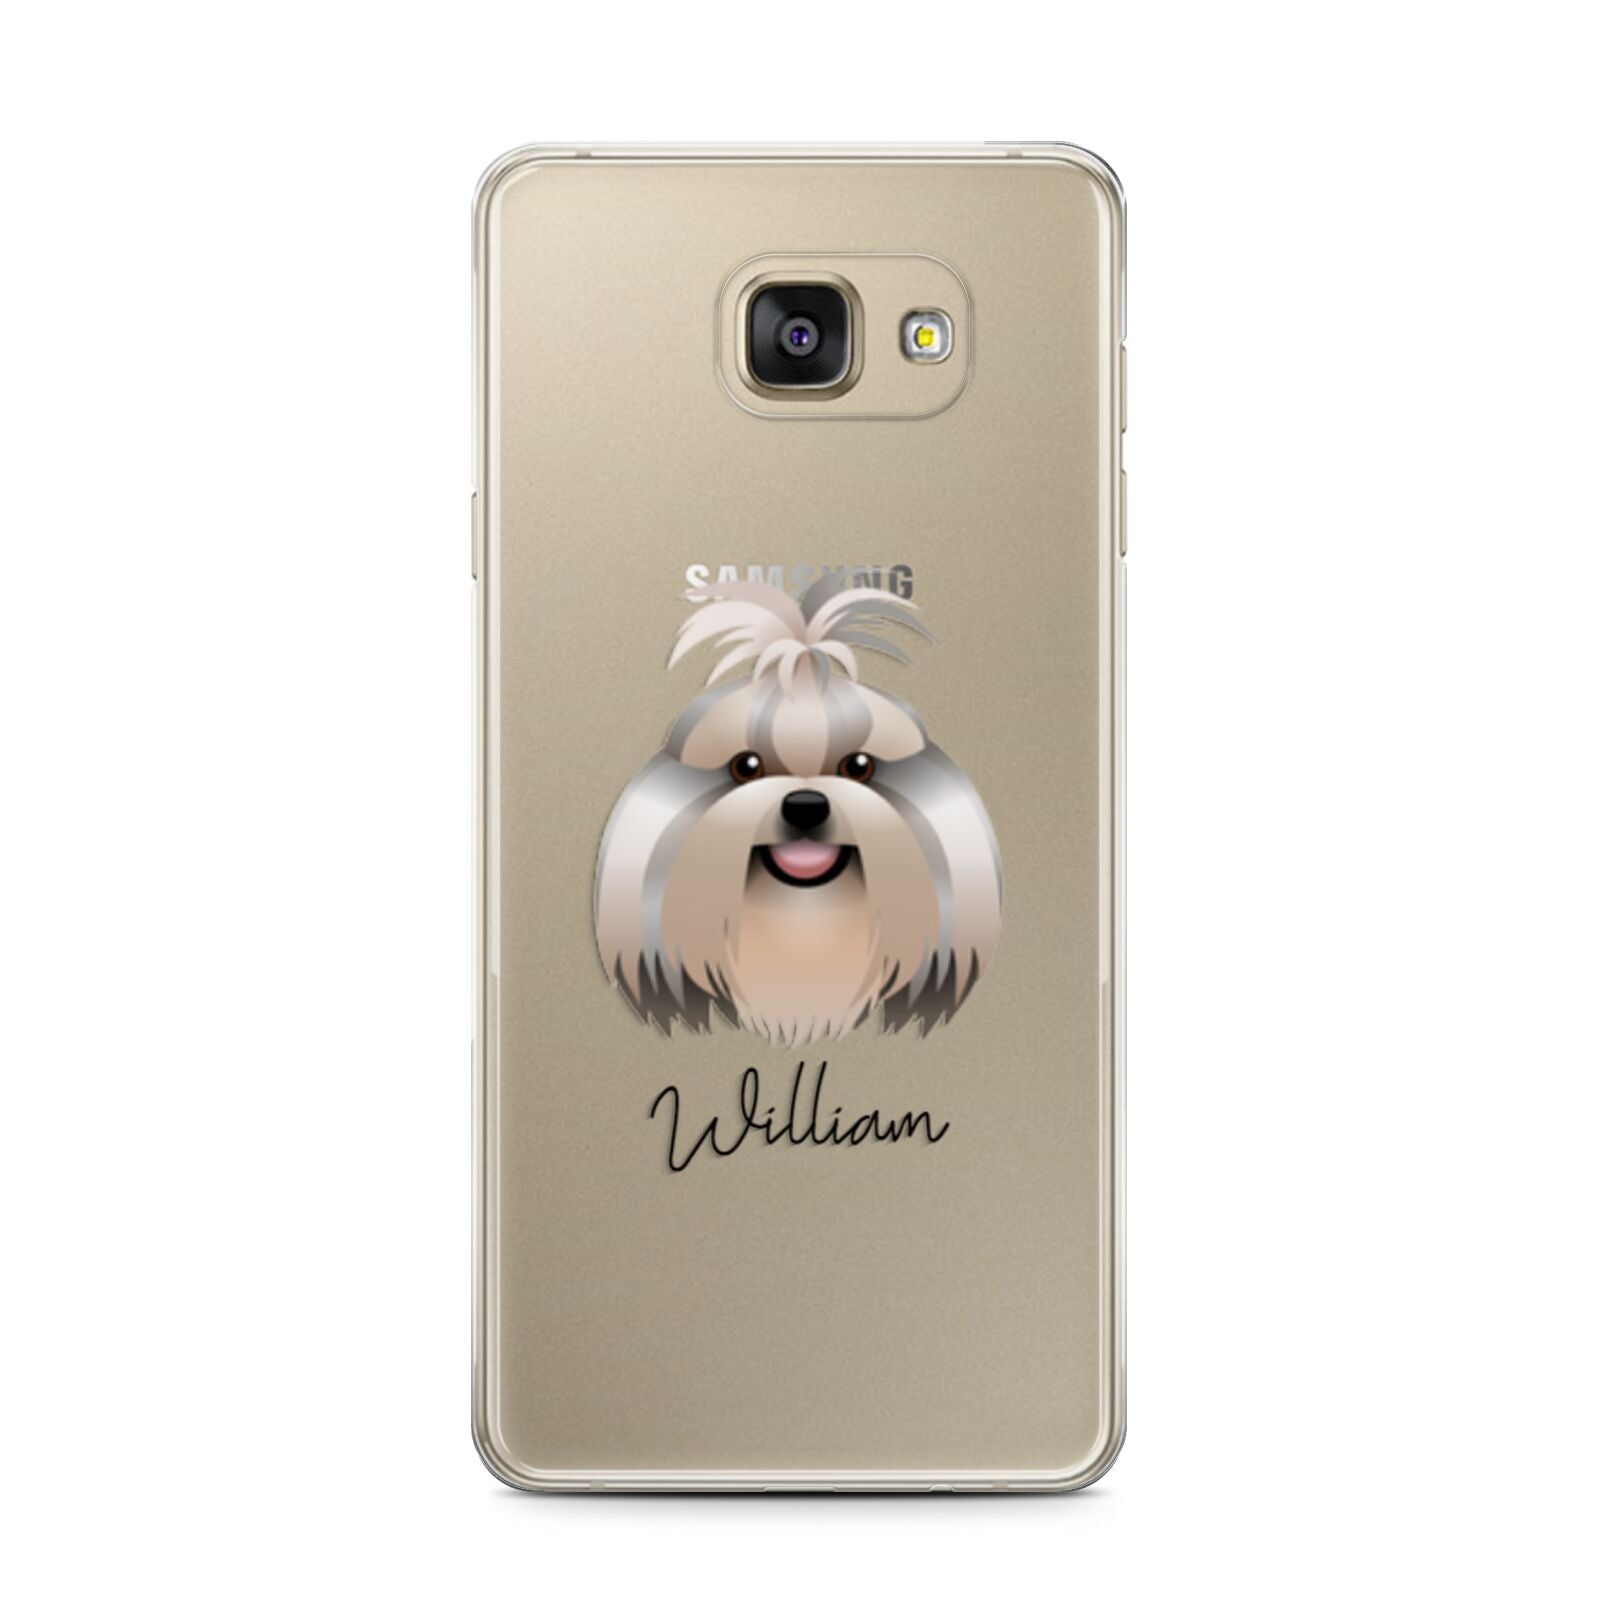 Shih Tzu Personalised Samsung Galaxy A7 2016 Case on gold phone